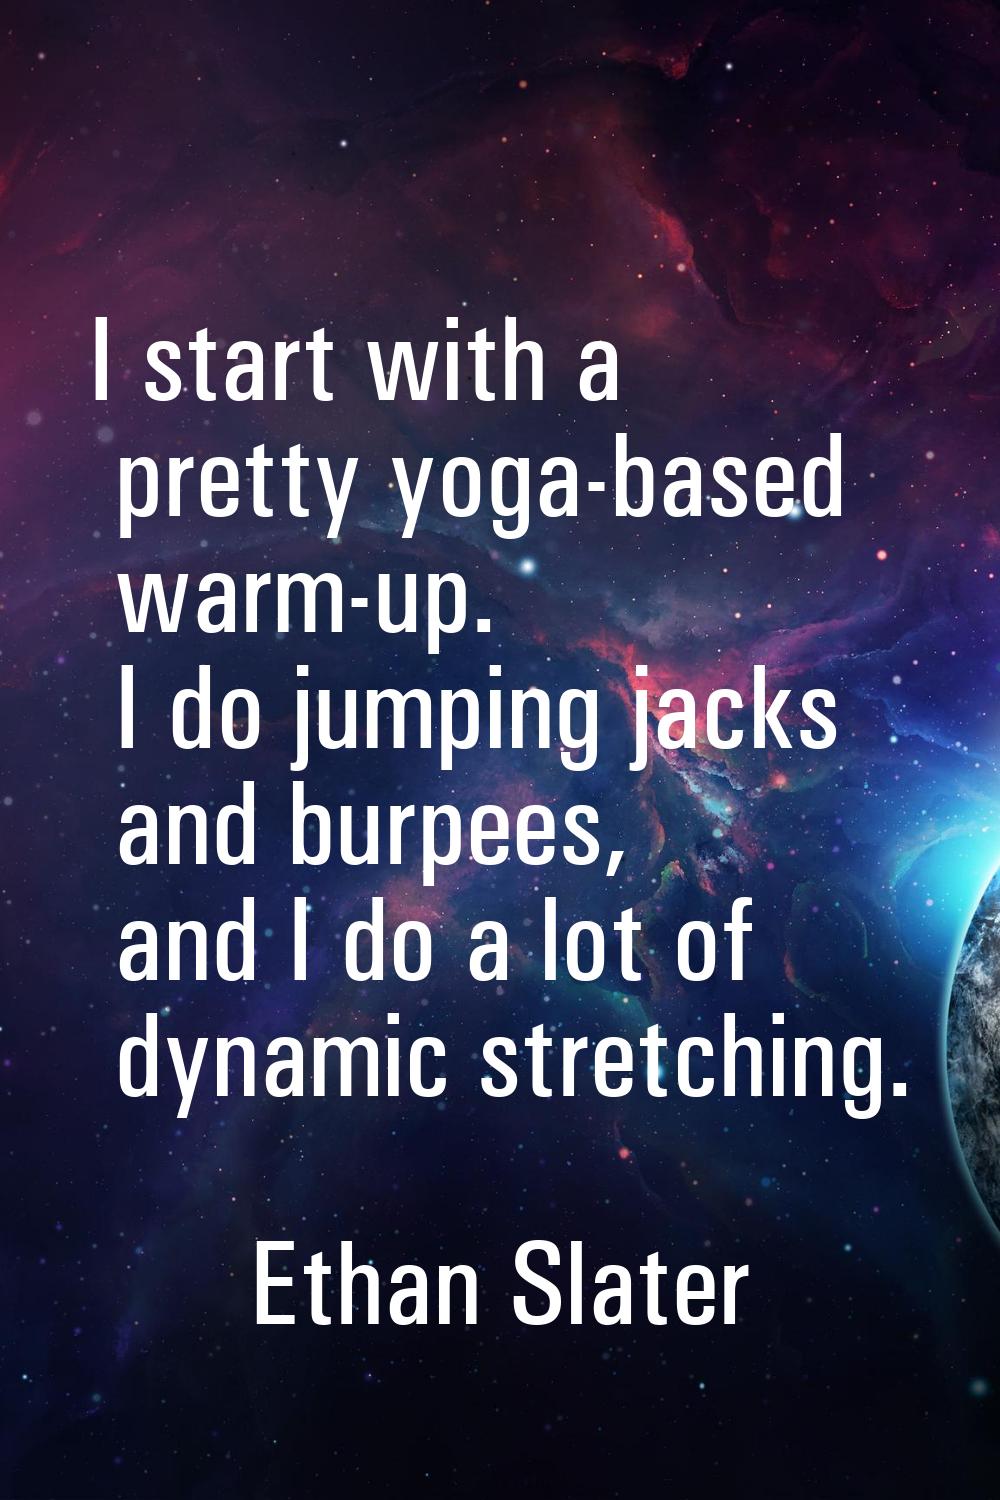 I start with a pretty yoga-based warm-up. I do jumping jacks and burpees, and I do a lot of dynamic